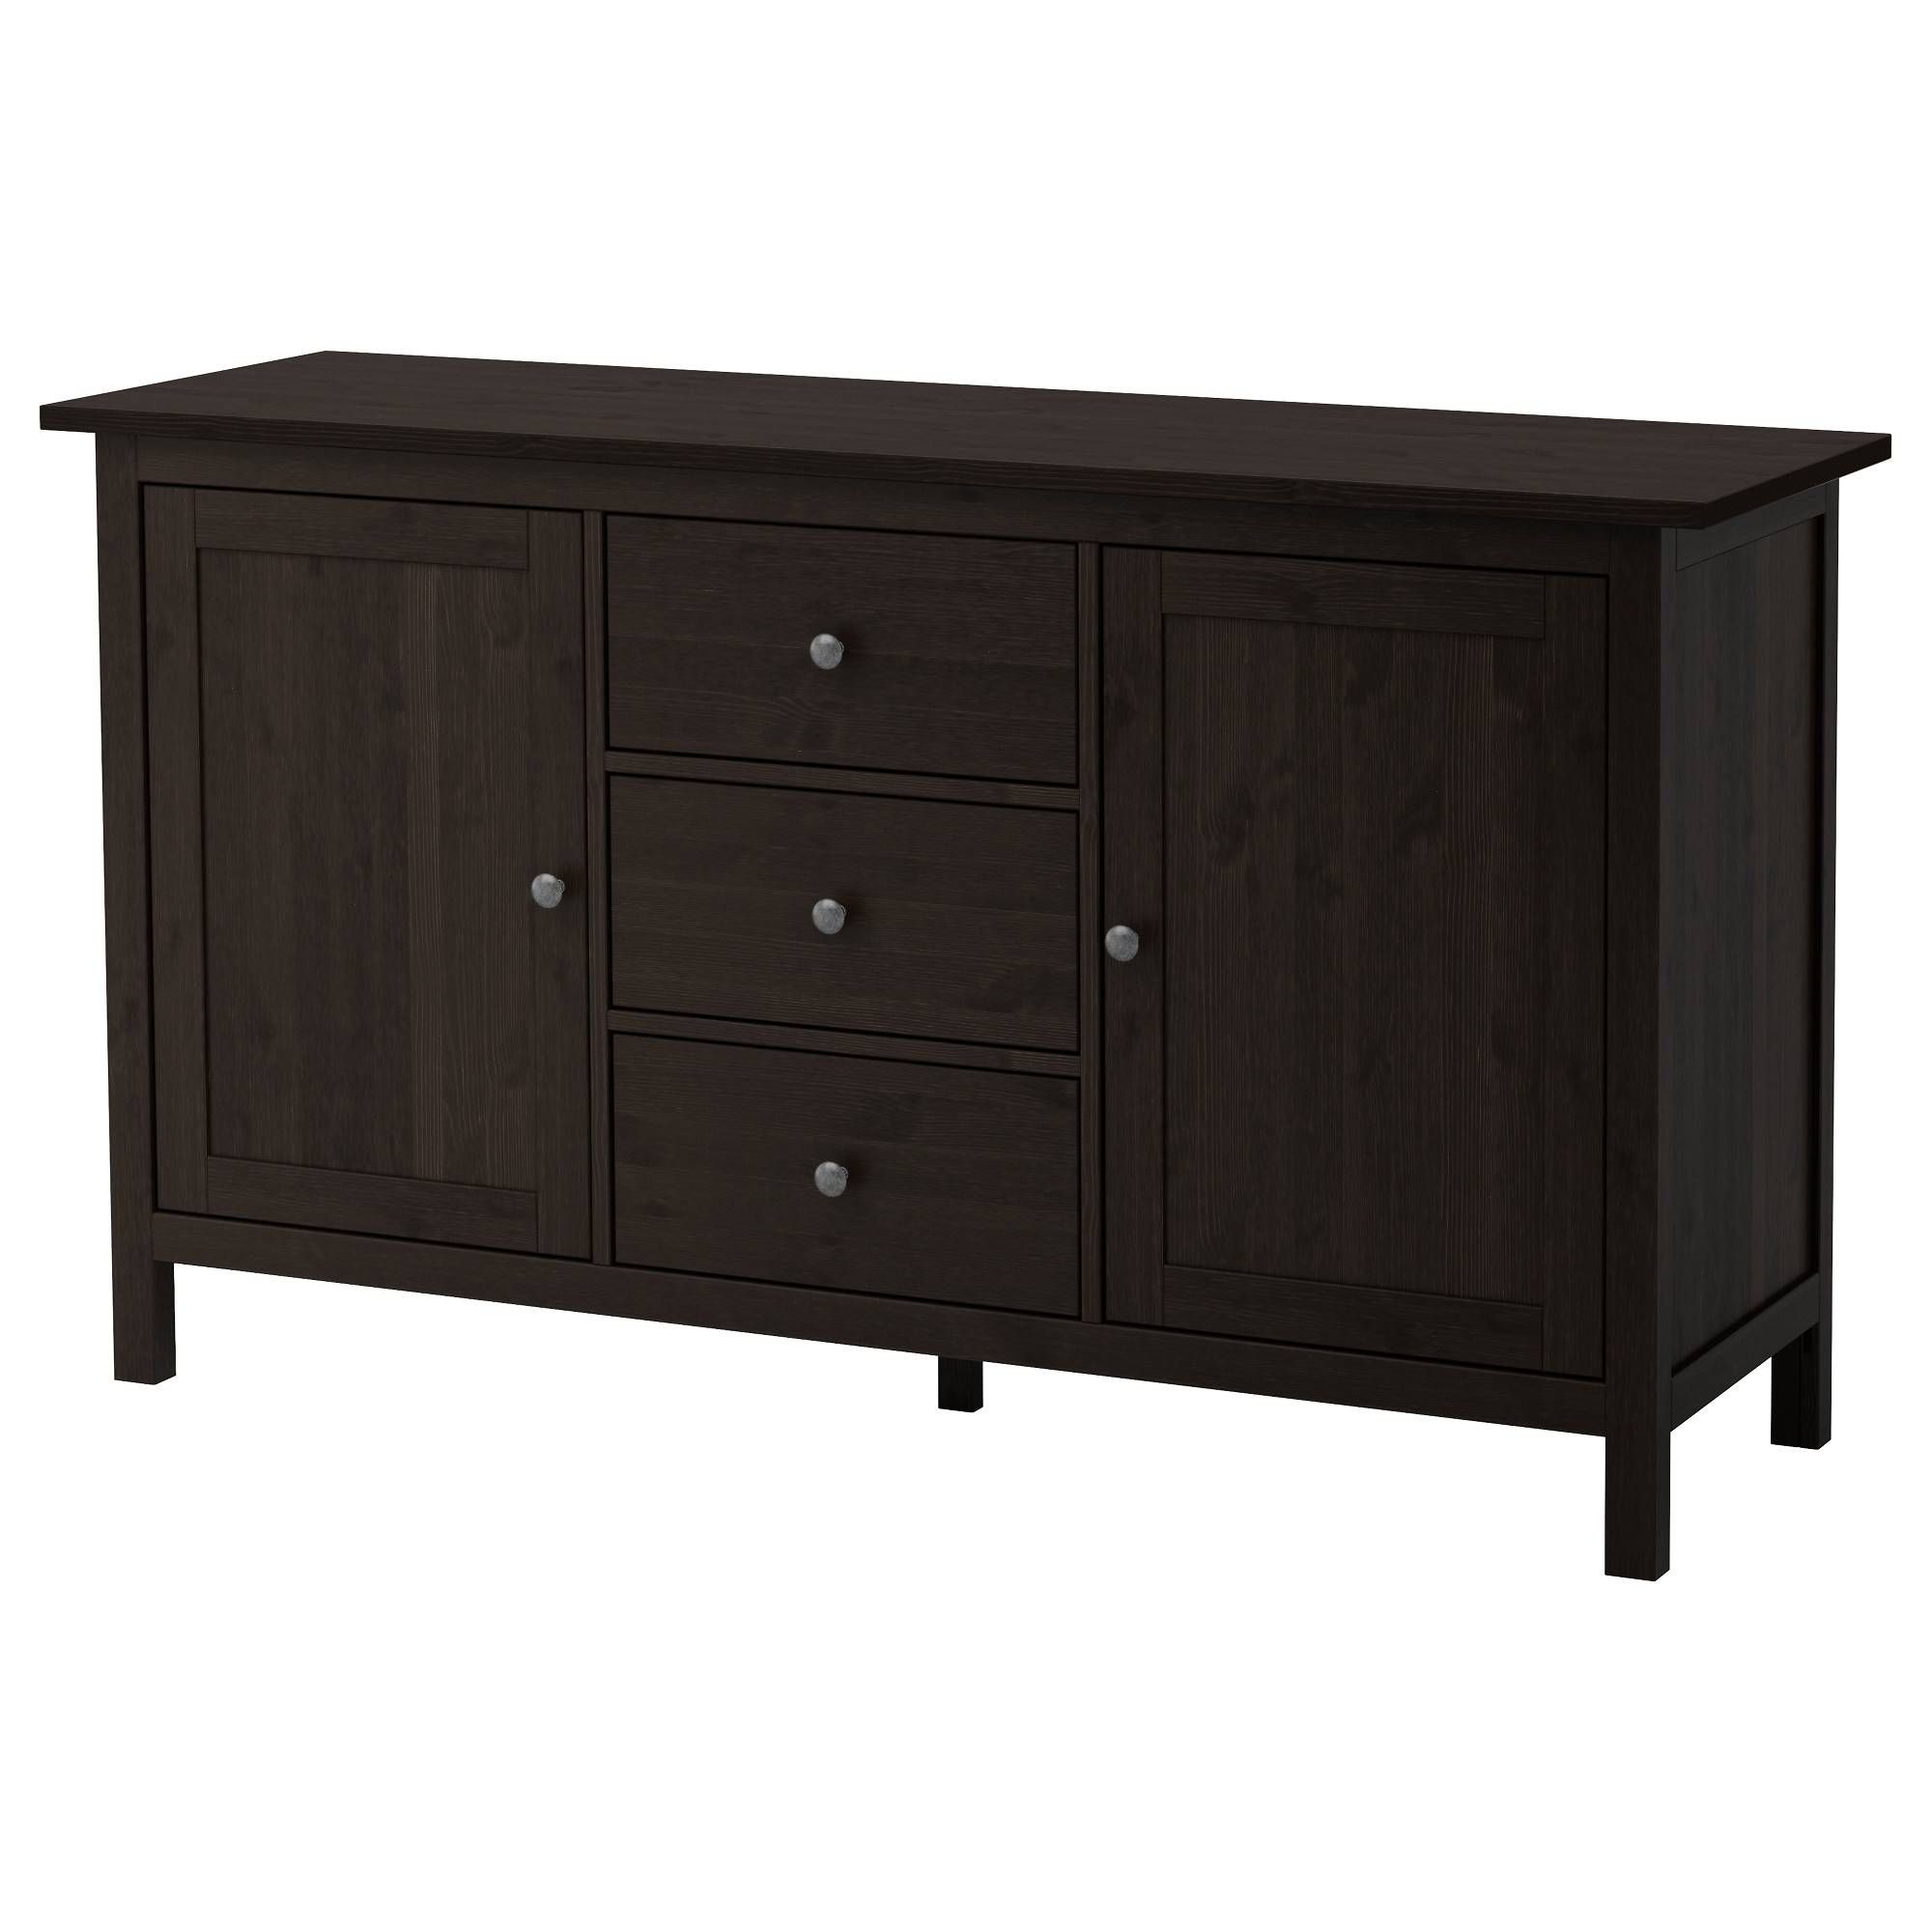 Dining Room Sideboards & Buffet Cabinets – Ikea Throughout Sideboards Cabinets (View 4 of 15)